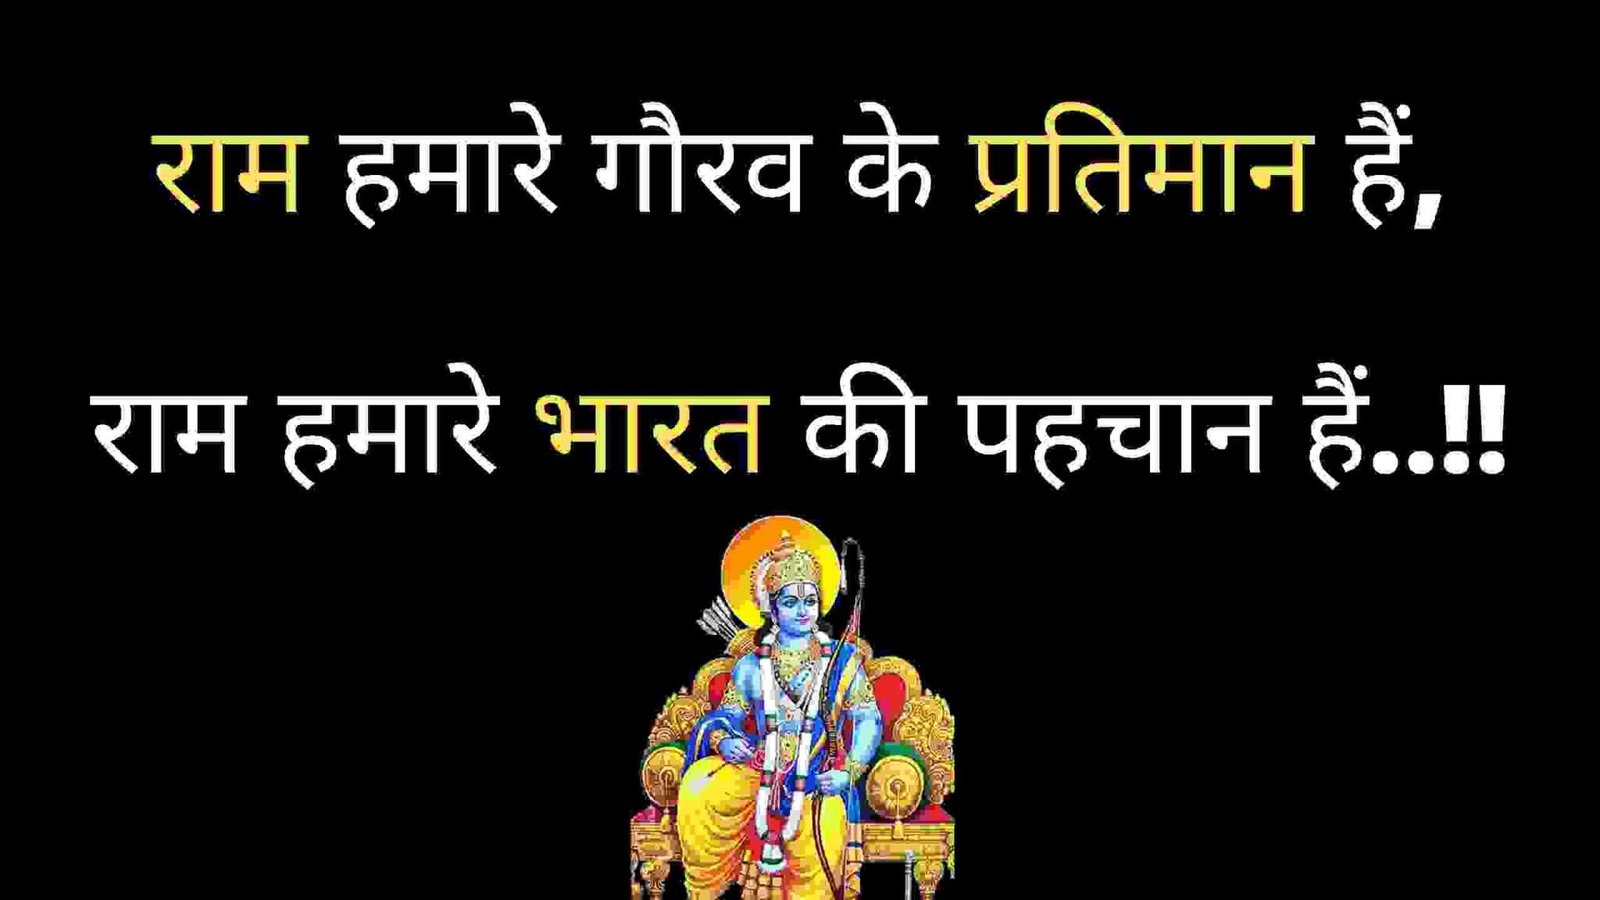 hindu Jay Shri Ram Status in Hindi with images by multi-knowledge.com